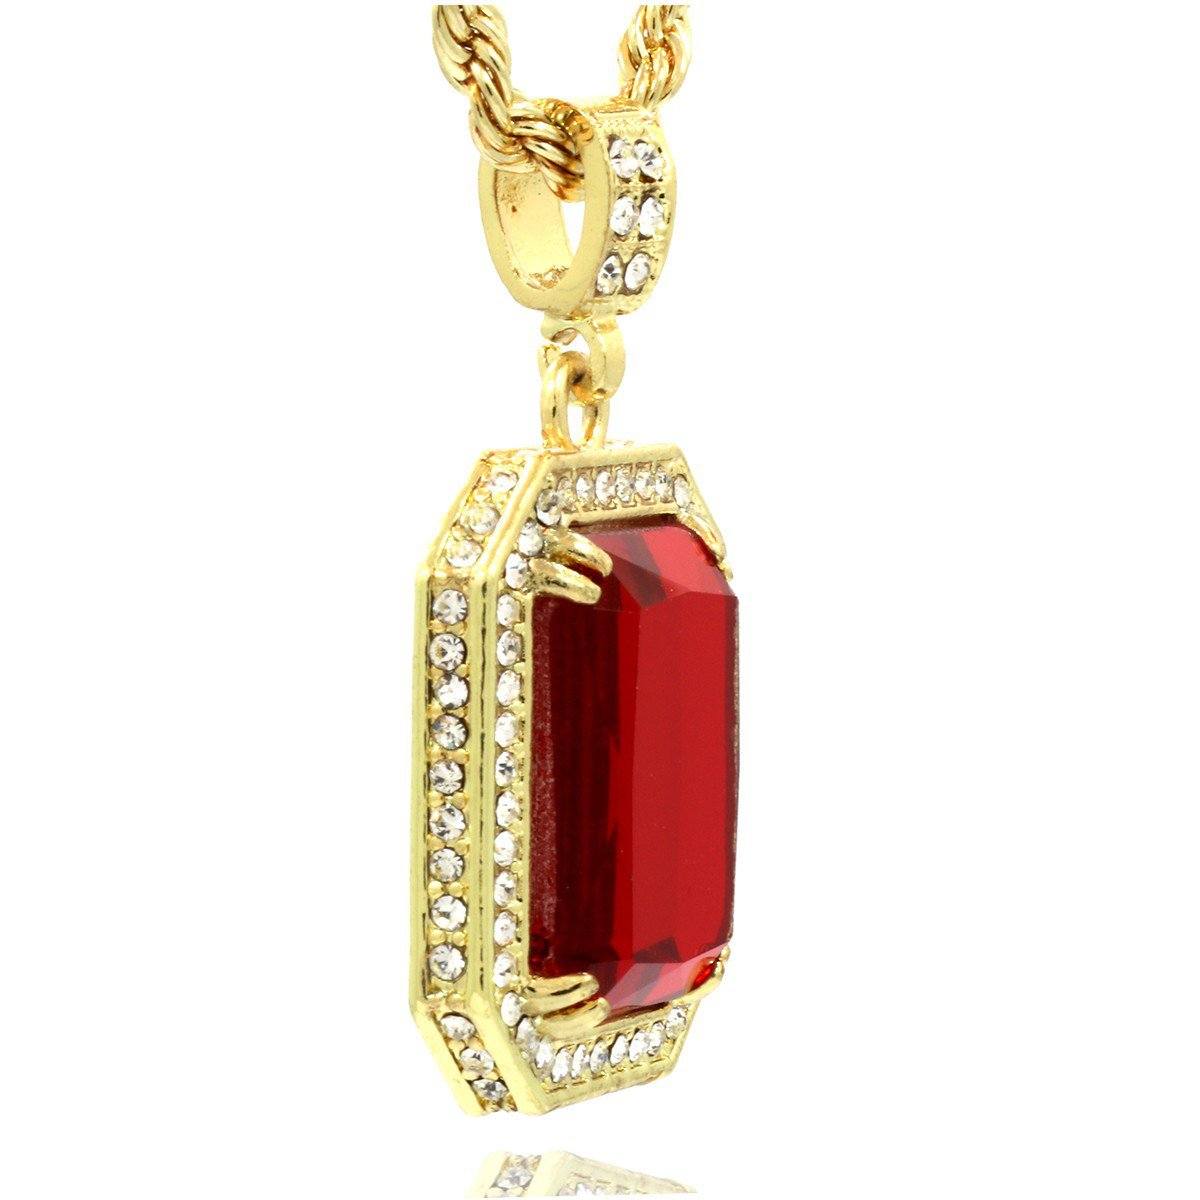 RED RUBY PENDANT WITH GOLD ROPE CHAIN